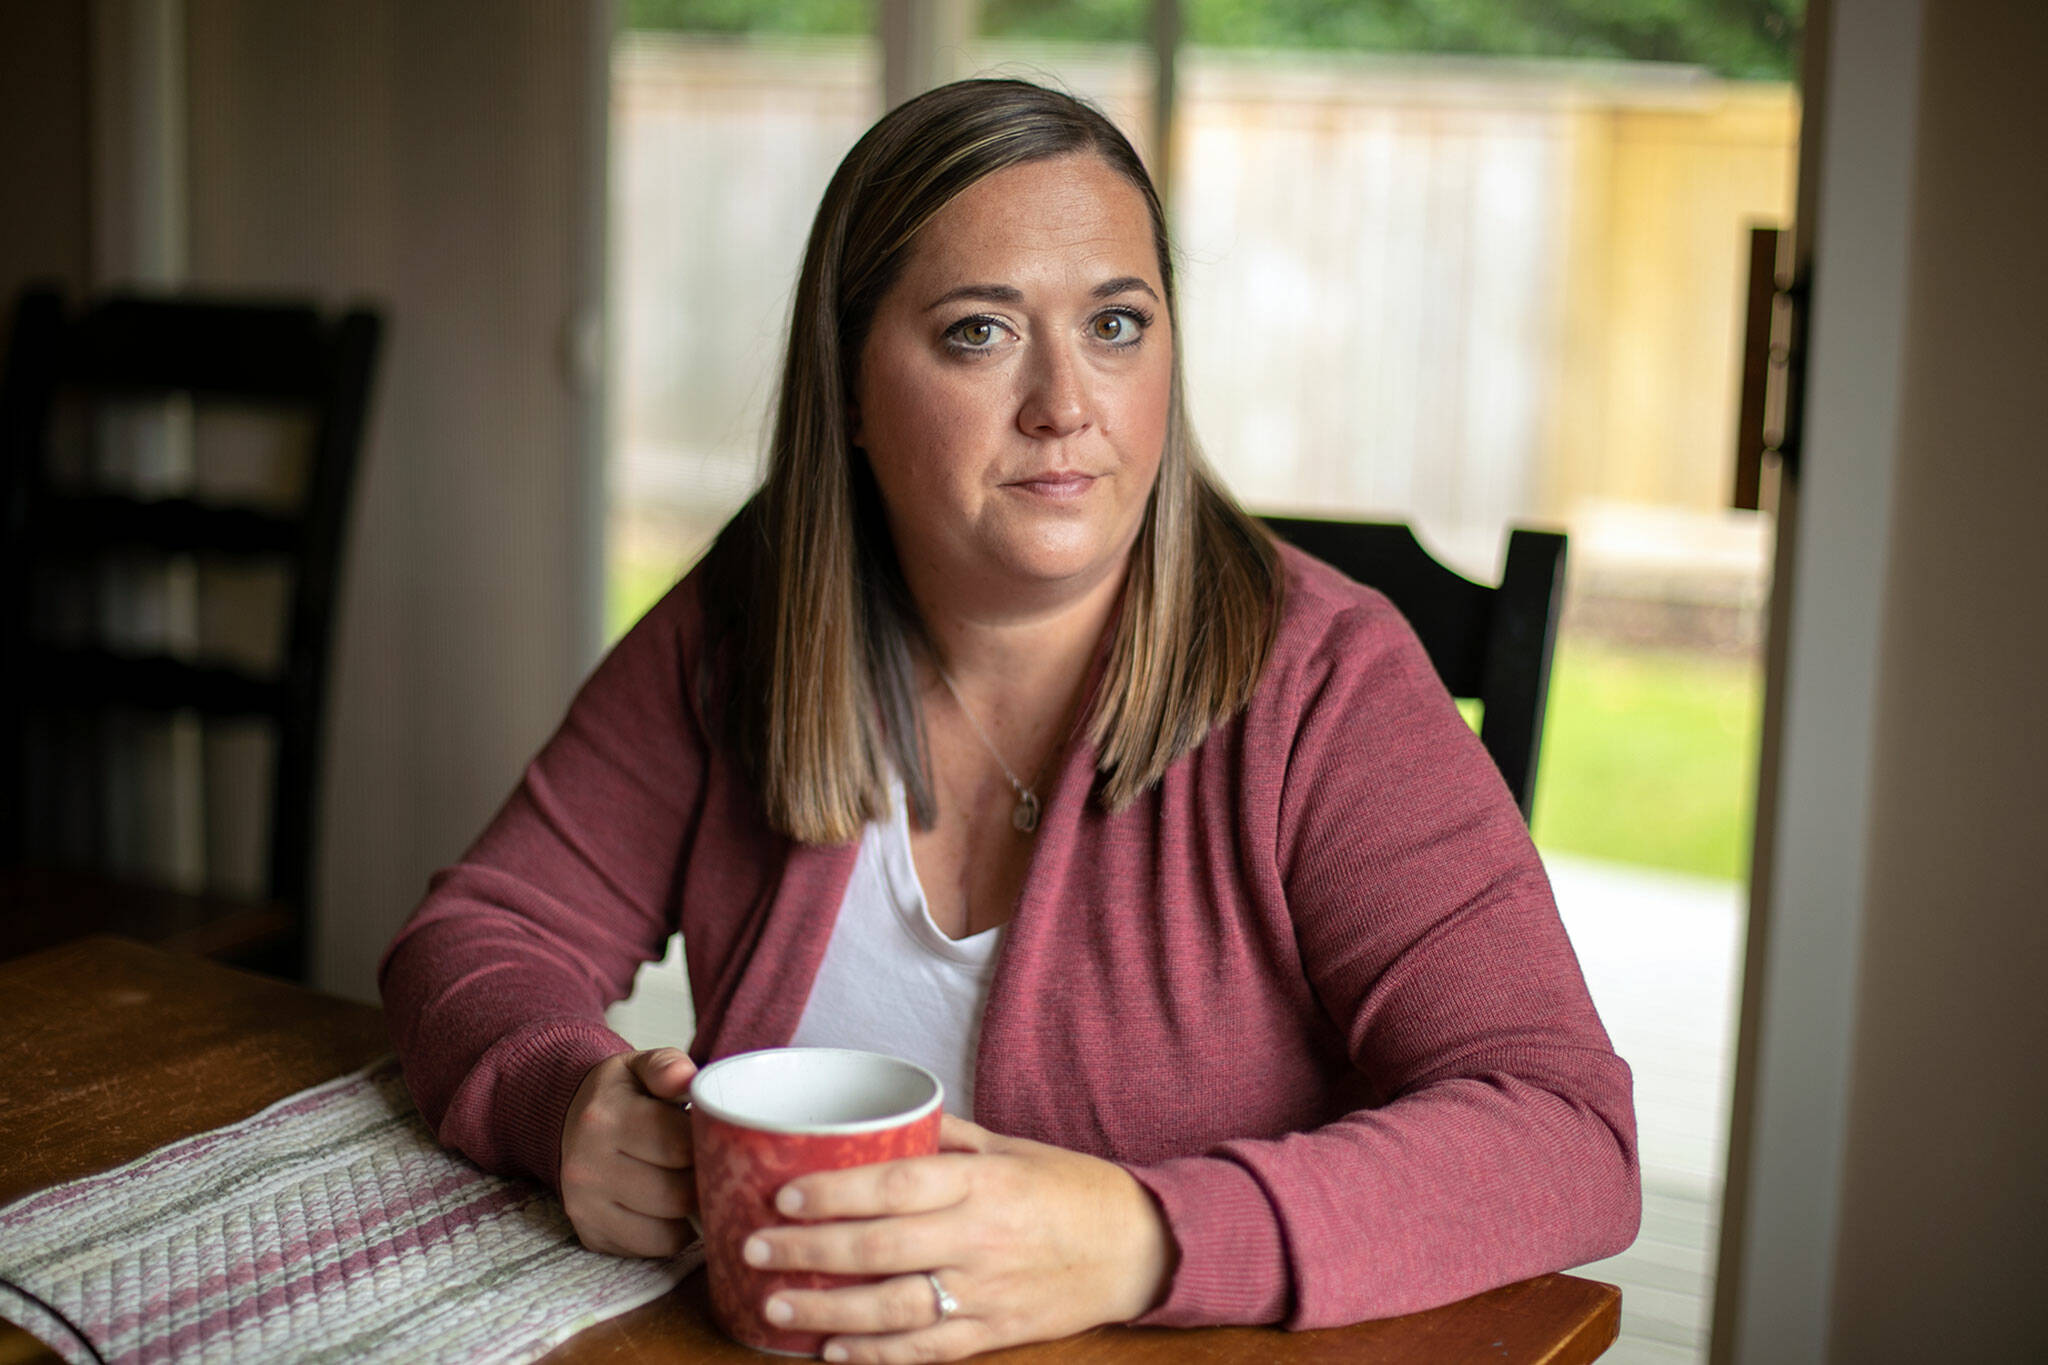 Marie Riley, 42, sits in her dining room with a cup of tea on Oct. 25, at her family’s home in North Bend. Riley was born with tetralogy of fallot, a rare congenital heart condition that has required multiple open-heart surgeries during her lifetime. (Ryan Berry / The Herald)